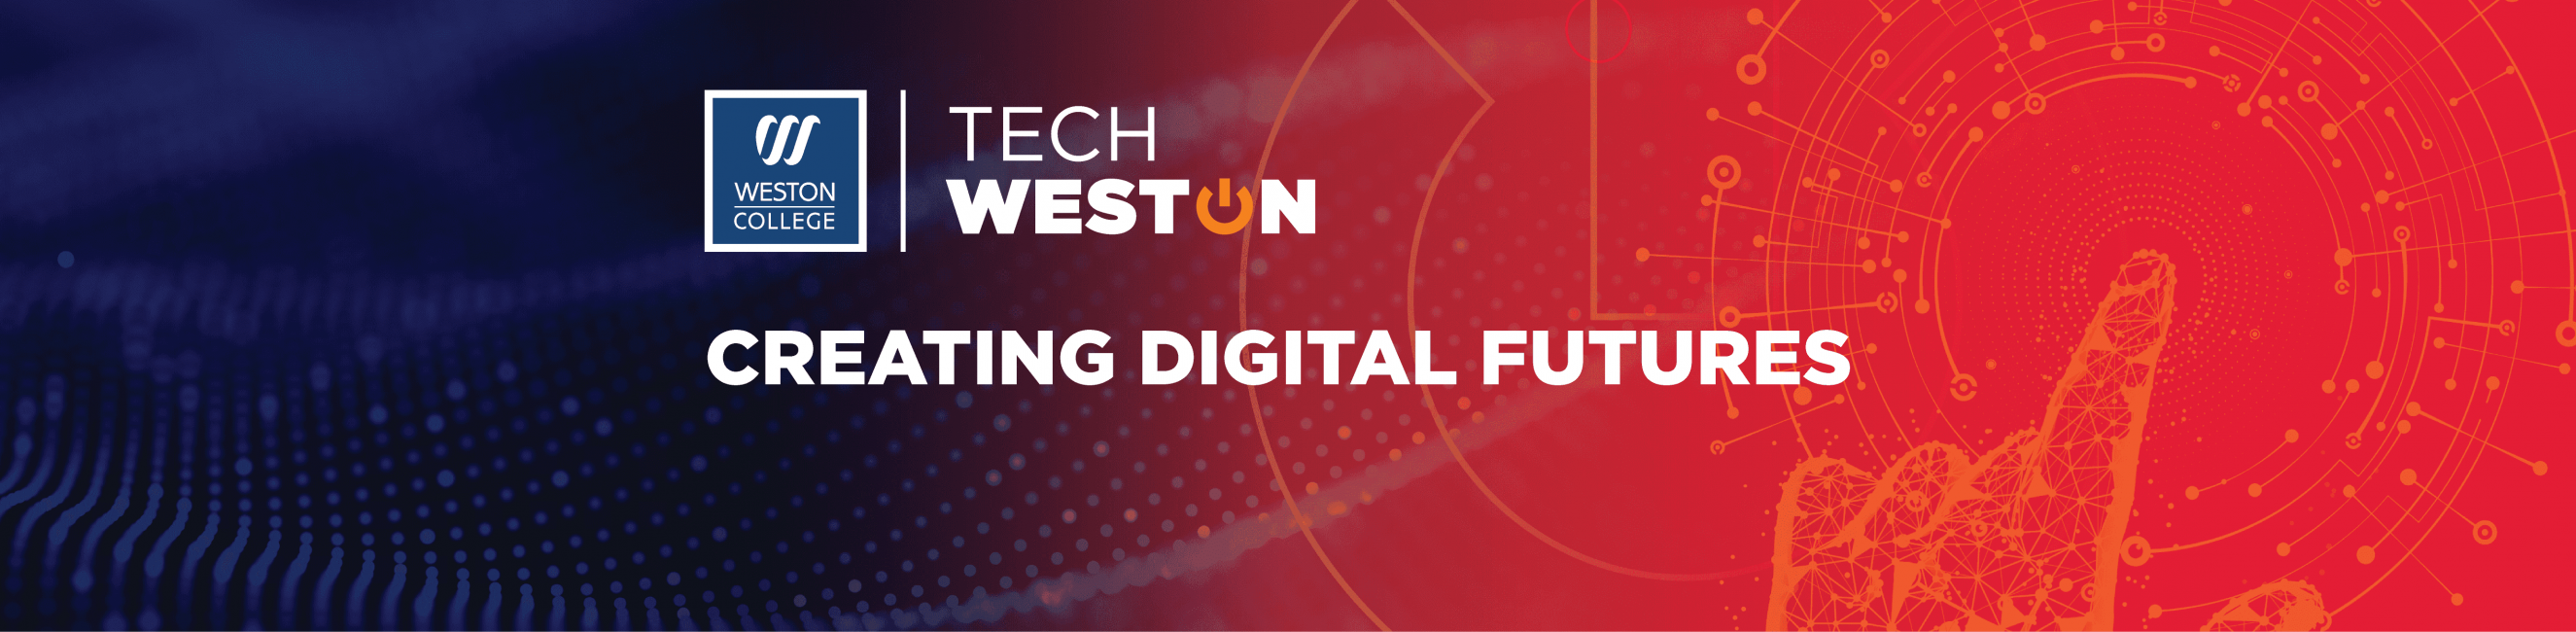 Techweston, digital courses and training for bristol south west somerset